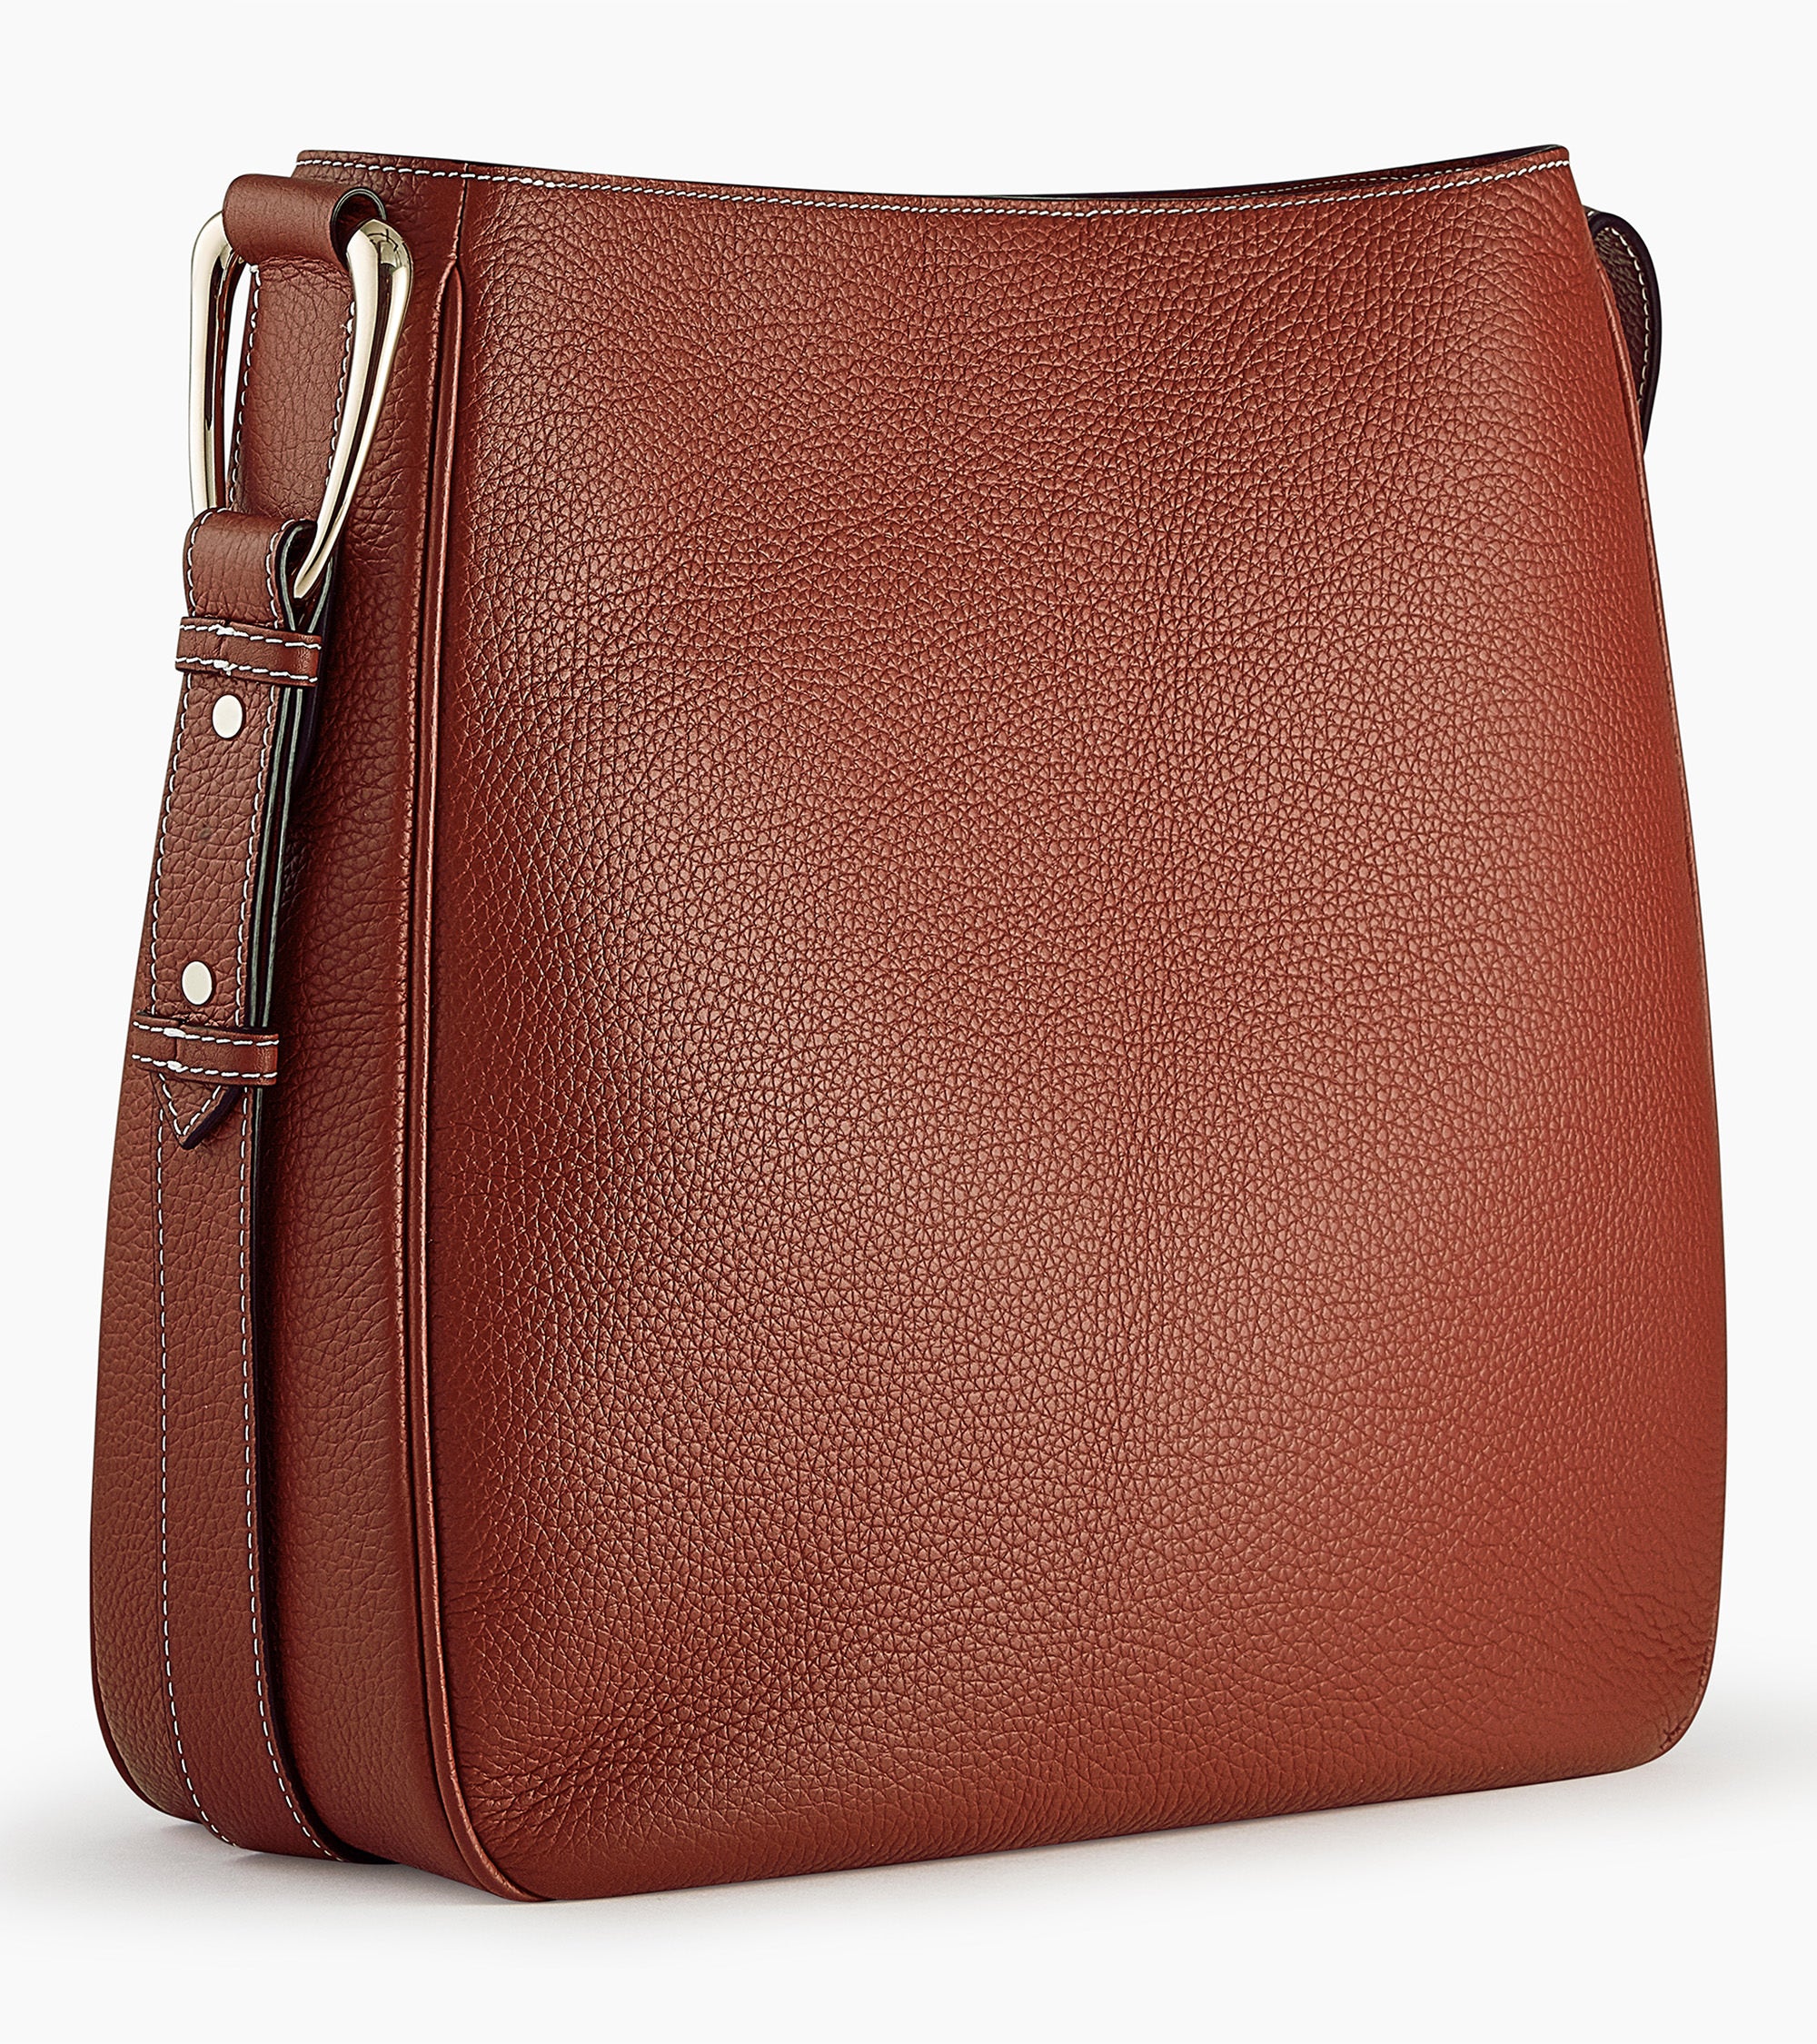 Madeleine large hobo bag in grained leather